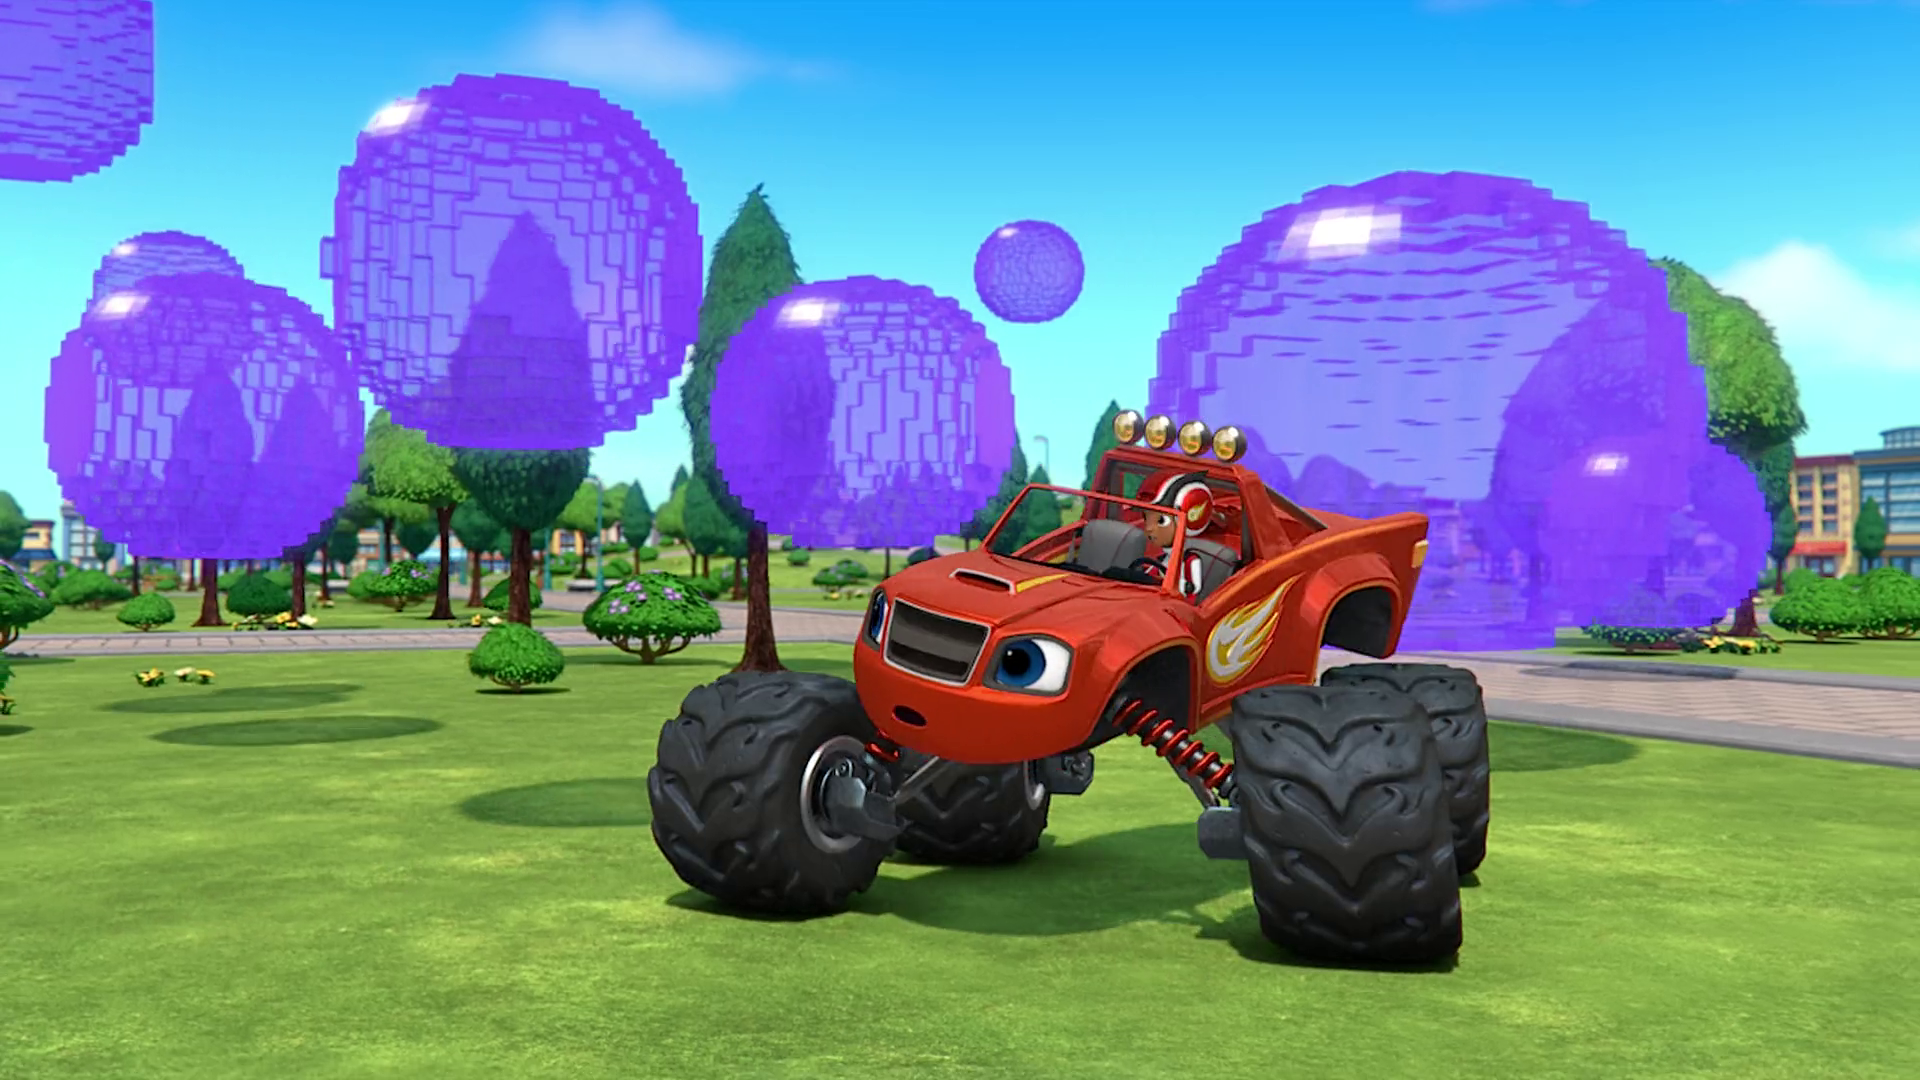 Video Game Heroes | Blaze and the Monster Machines Wiki | Fandom